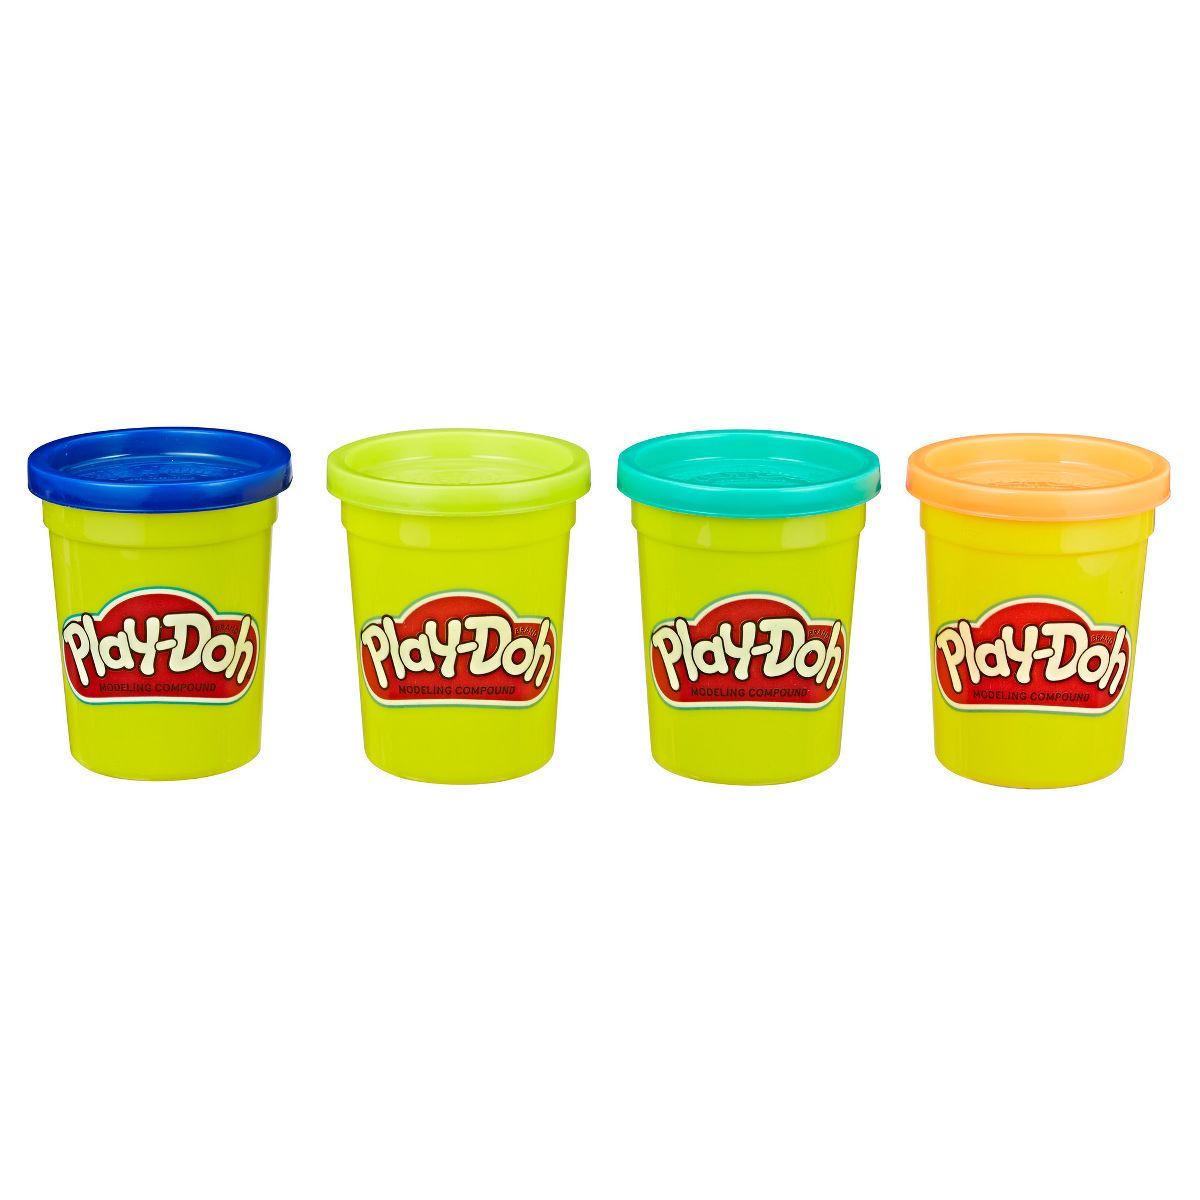 Play-Doh 4pk Modeling Compound Wild Colors | Target